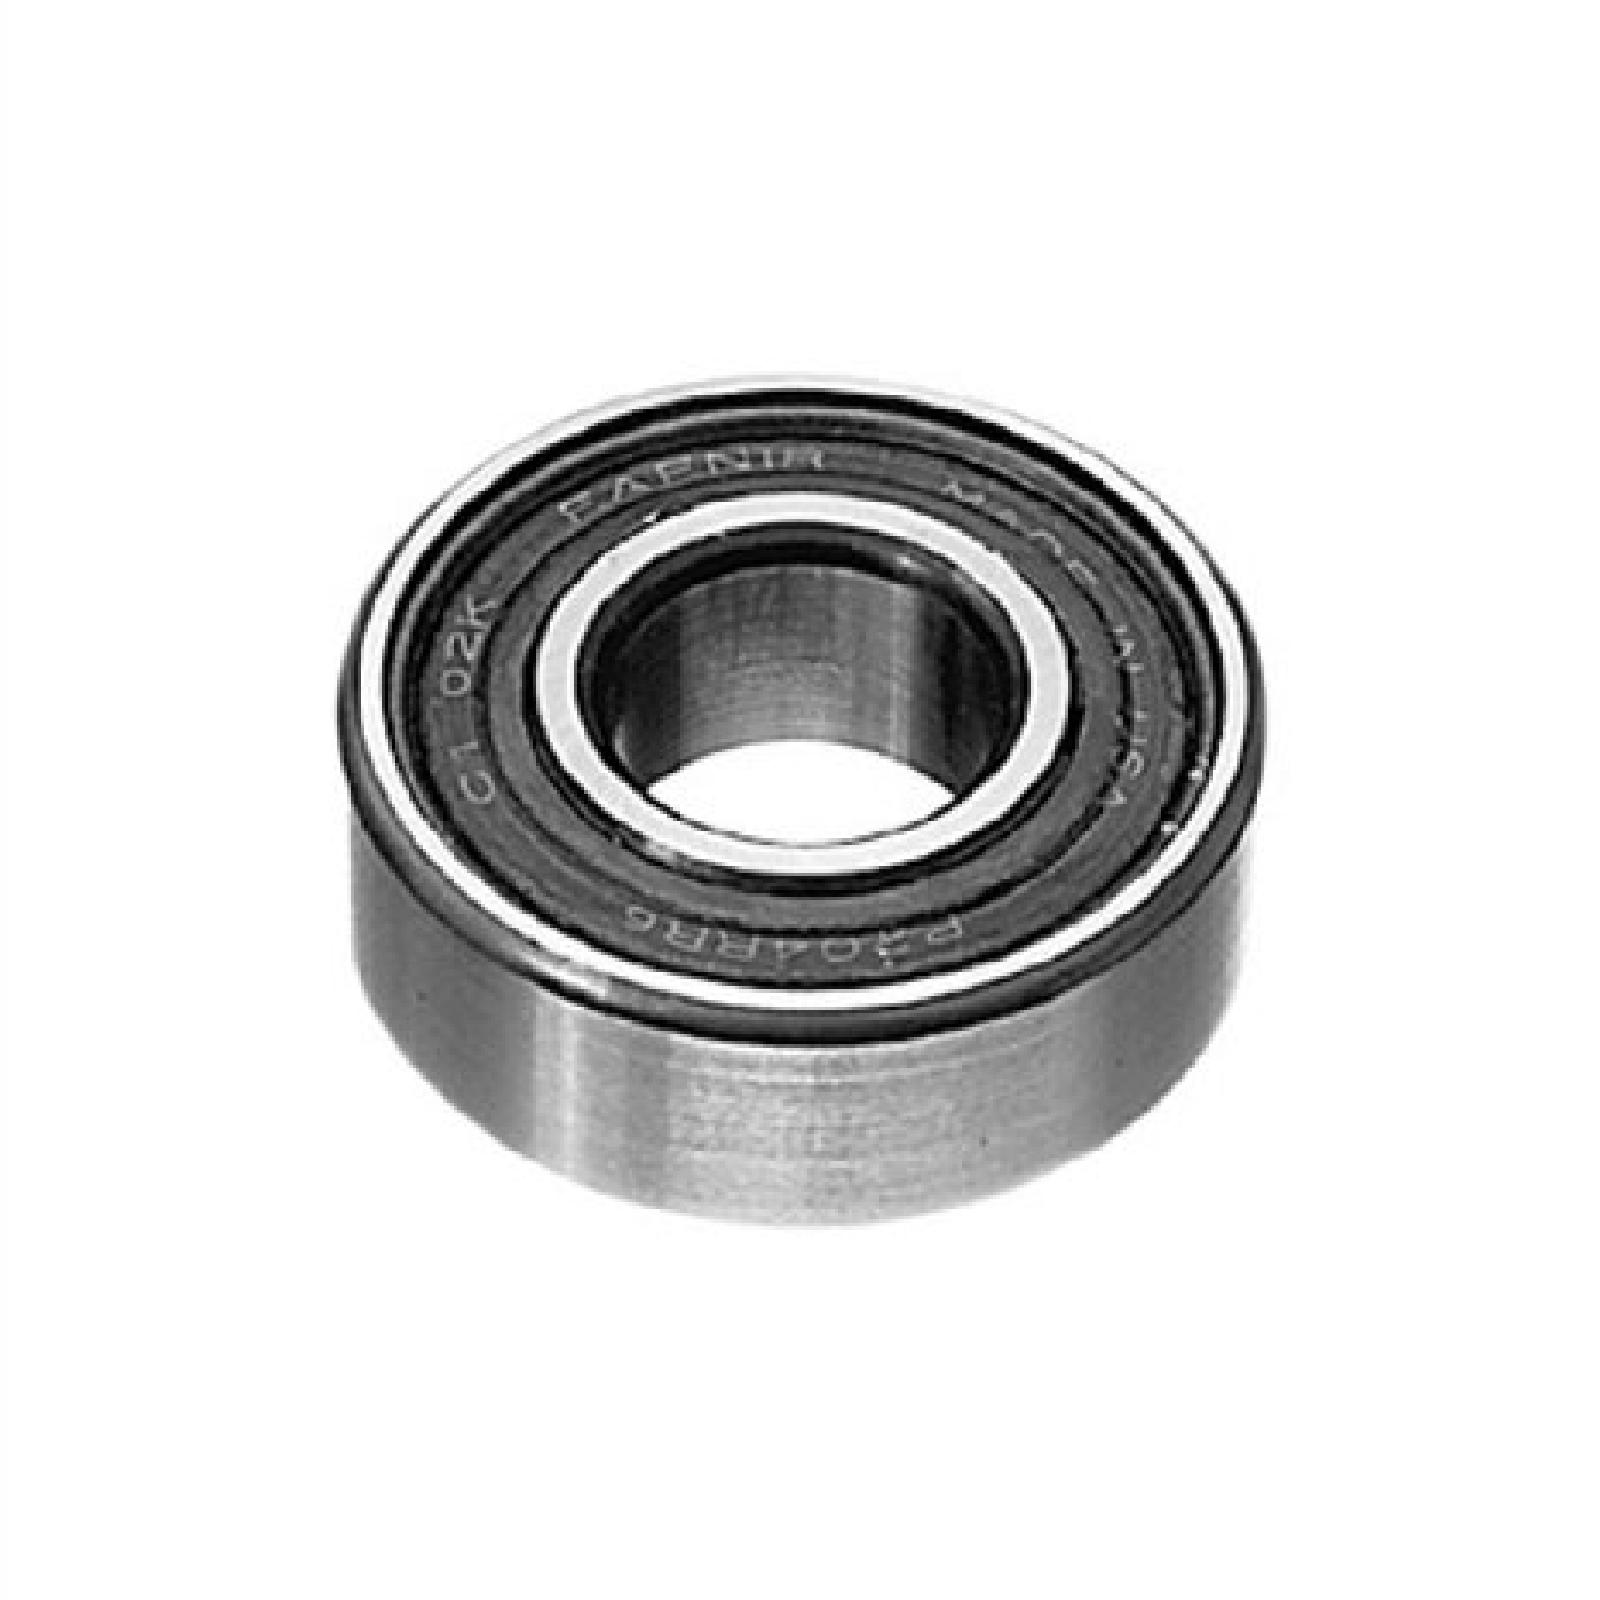 BEARING, BALL MAGNUM 6202 part# 45-254 by Oregon